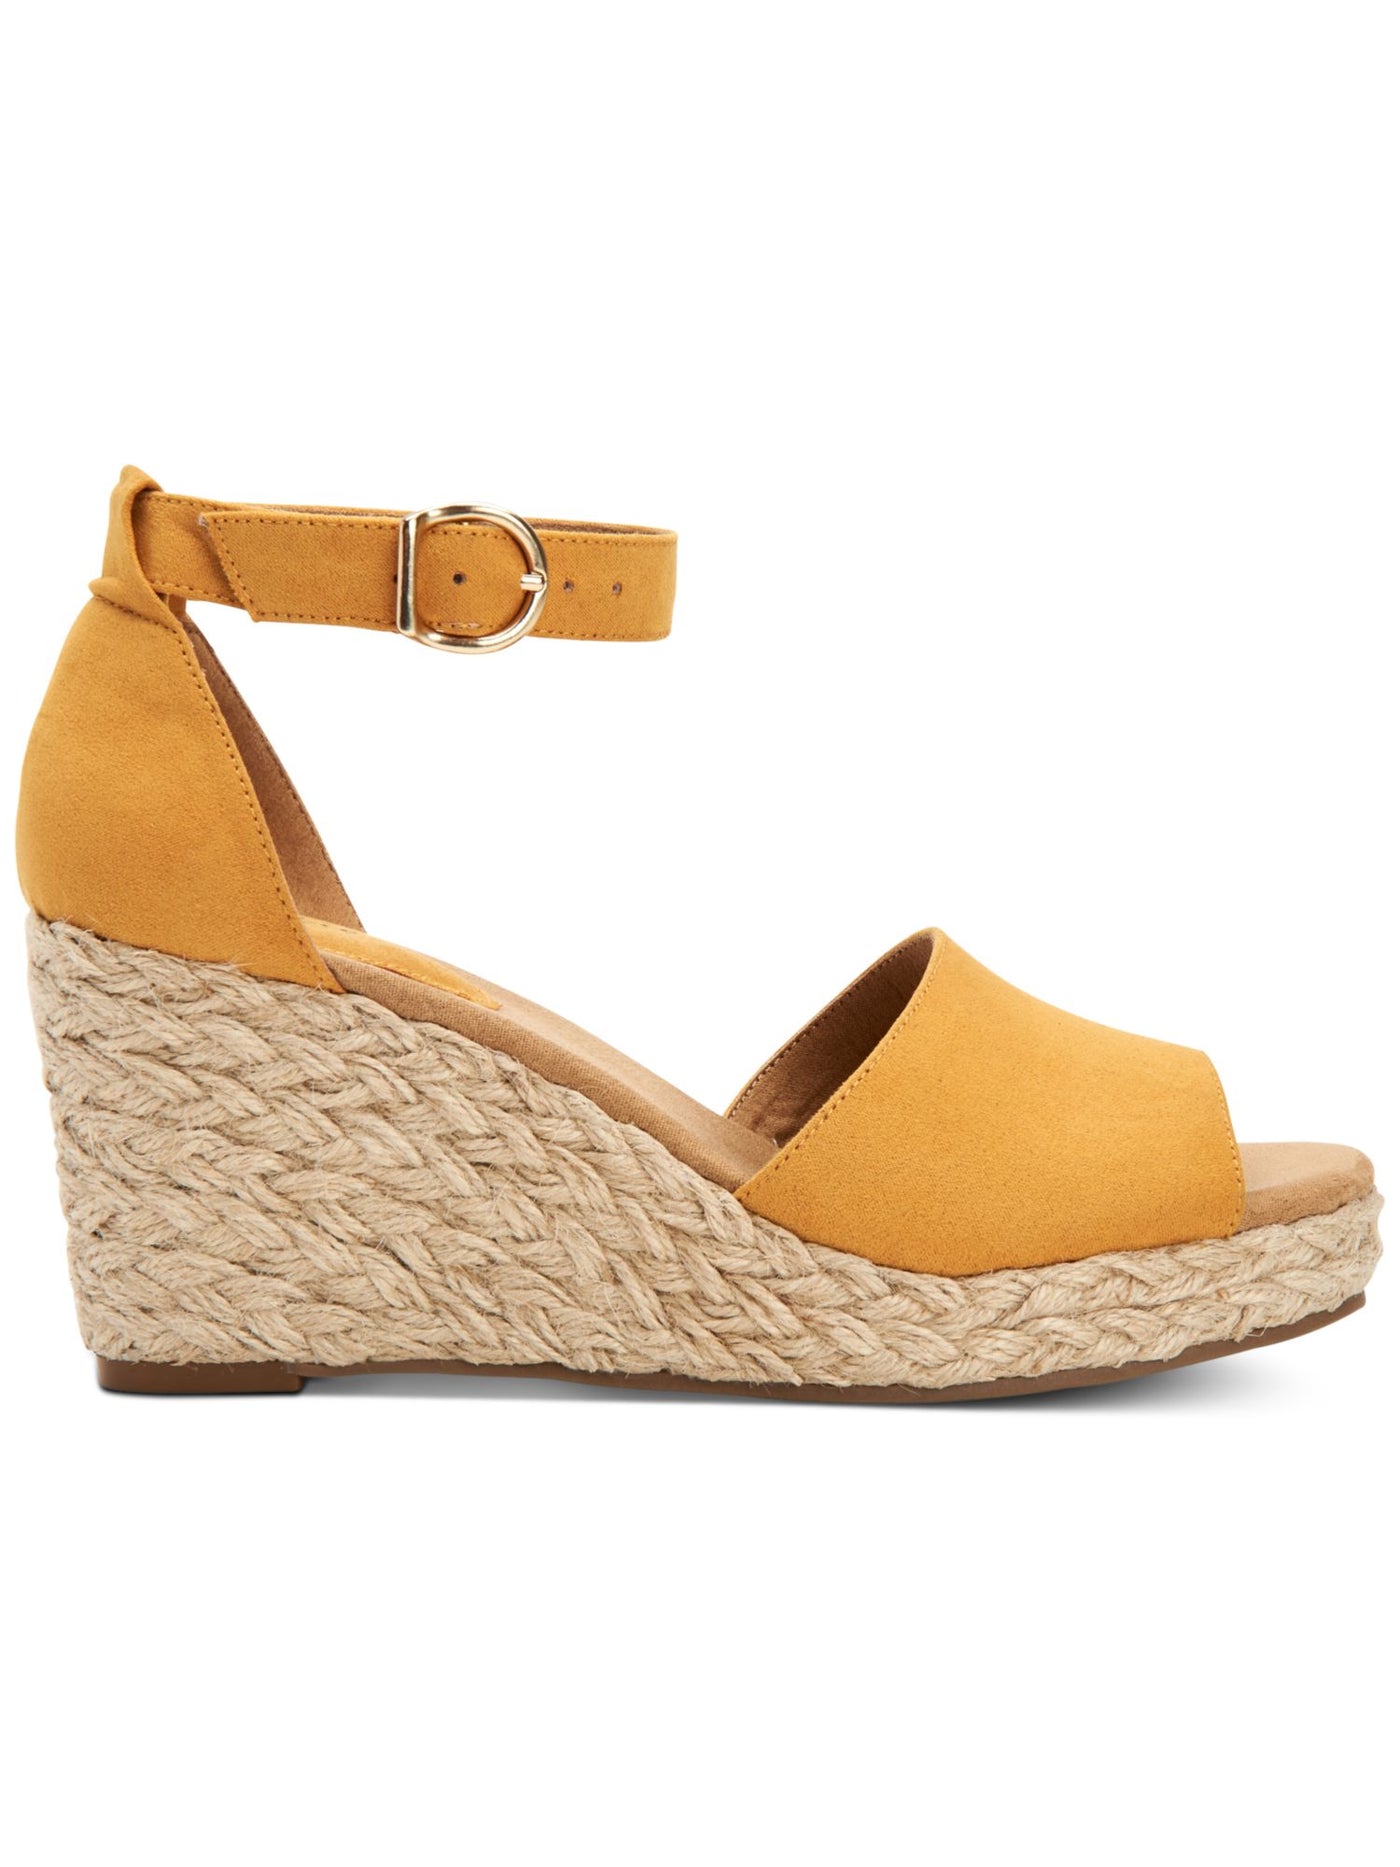 STYLE & COMPANY Womens Yellow Mc 1" Platform Braided Jute Ankle Strap Padded Seleeney Round Toe Wedge Buckle Espadrille Shoes 8 M